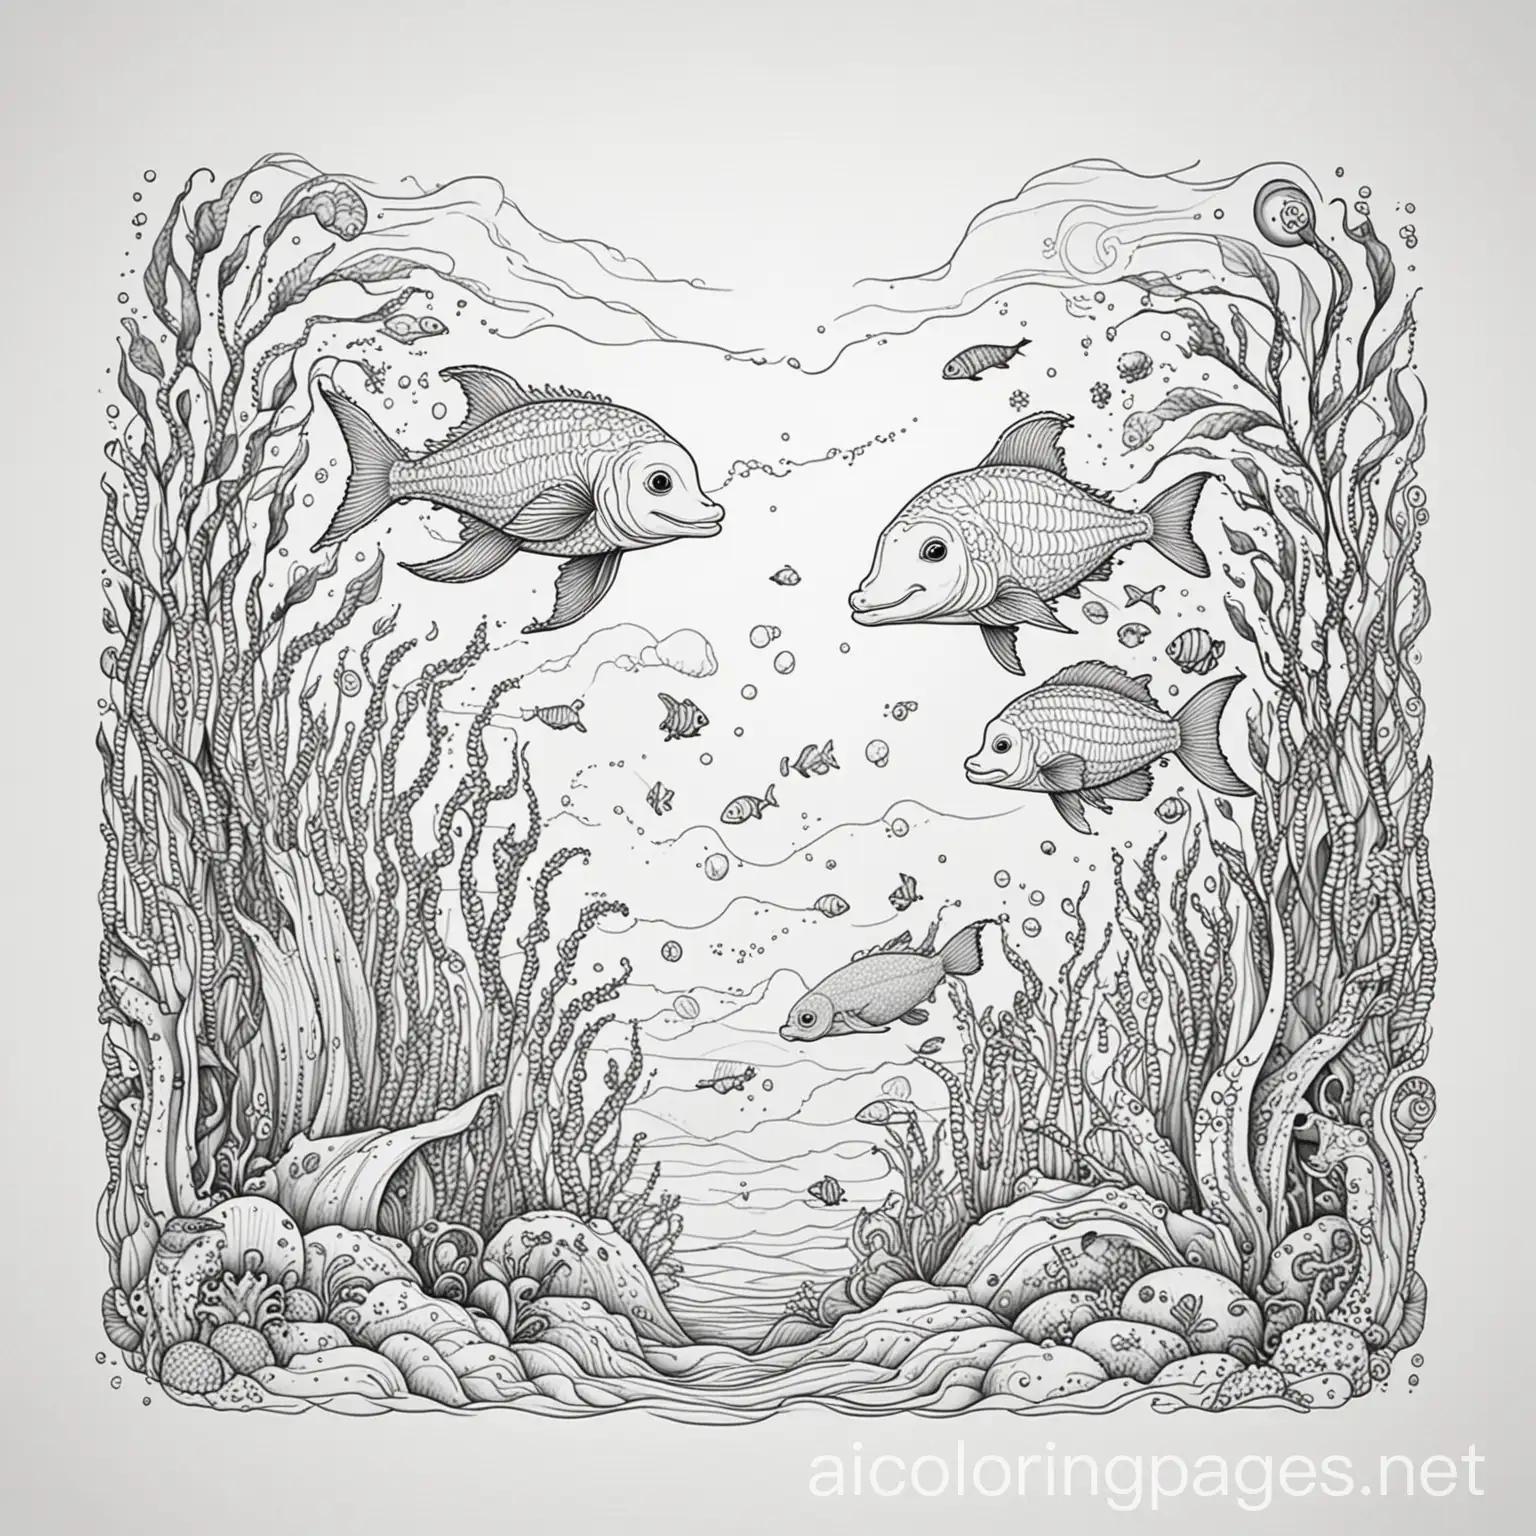 Mystical-Sea-Animals-Coloring-Page-Line-Art-on-White-Background